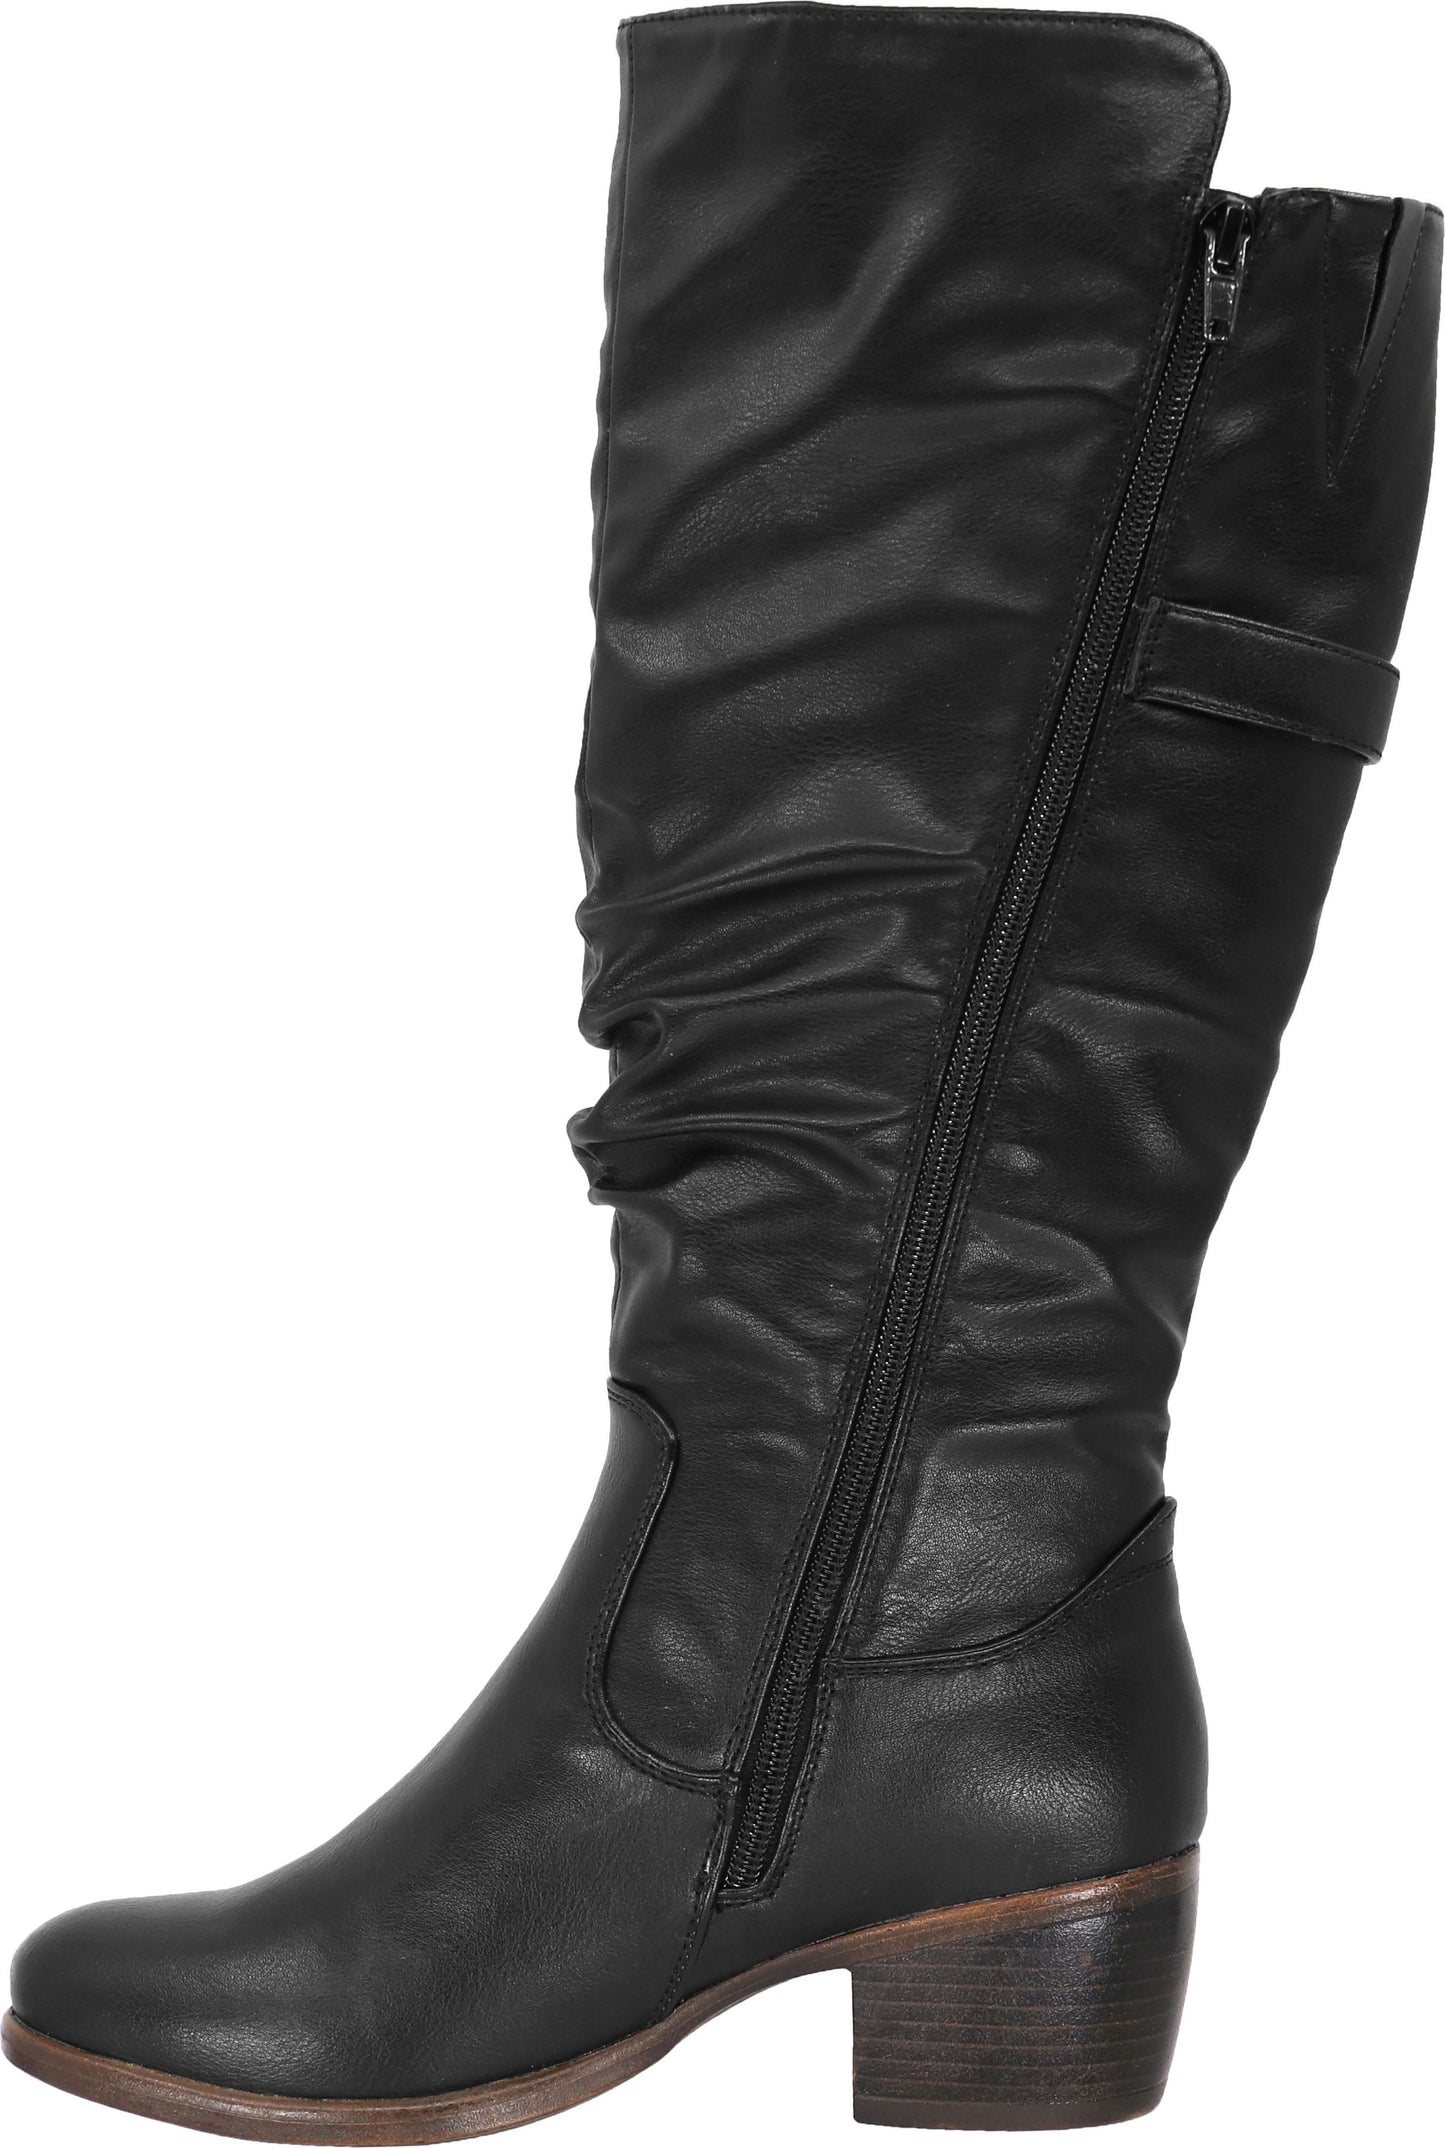 Taxi Boots Chicago Waterproof Black